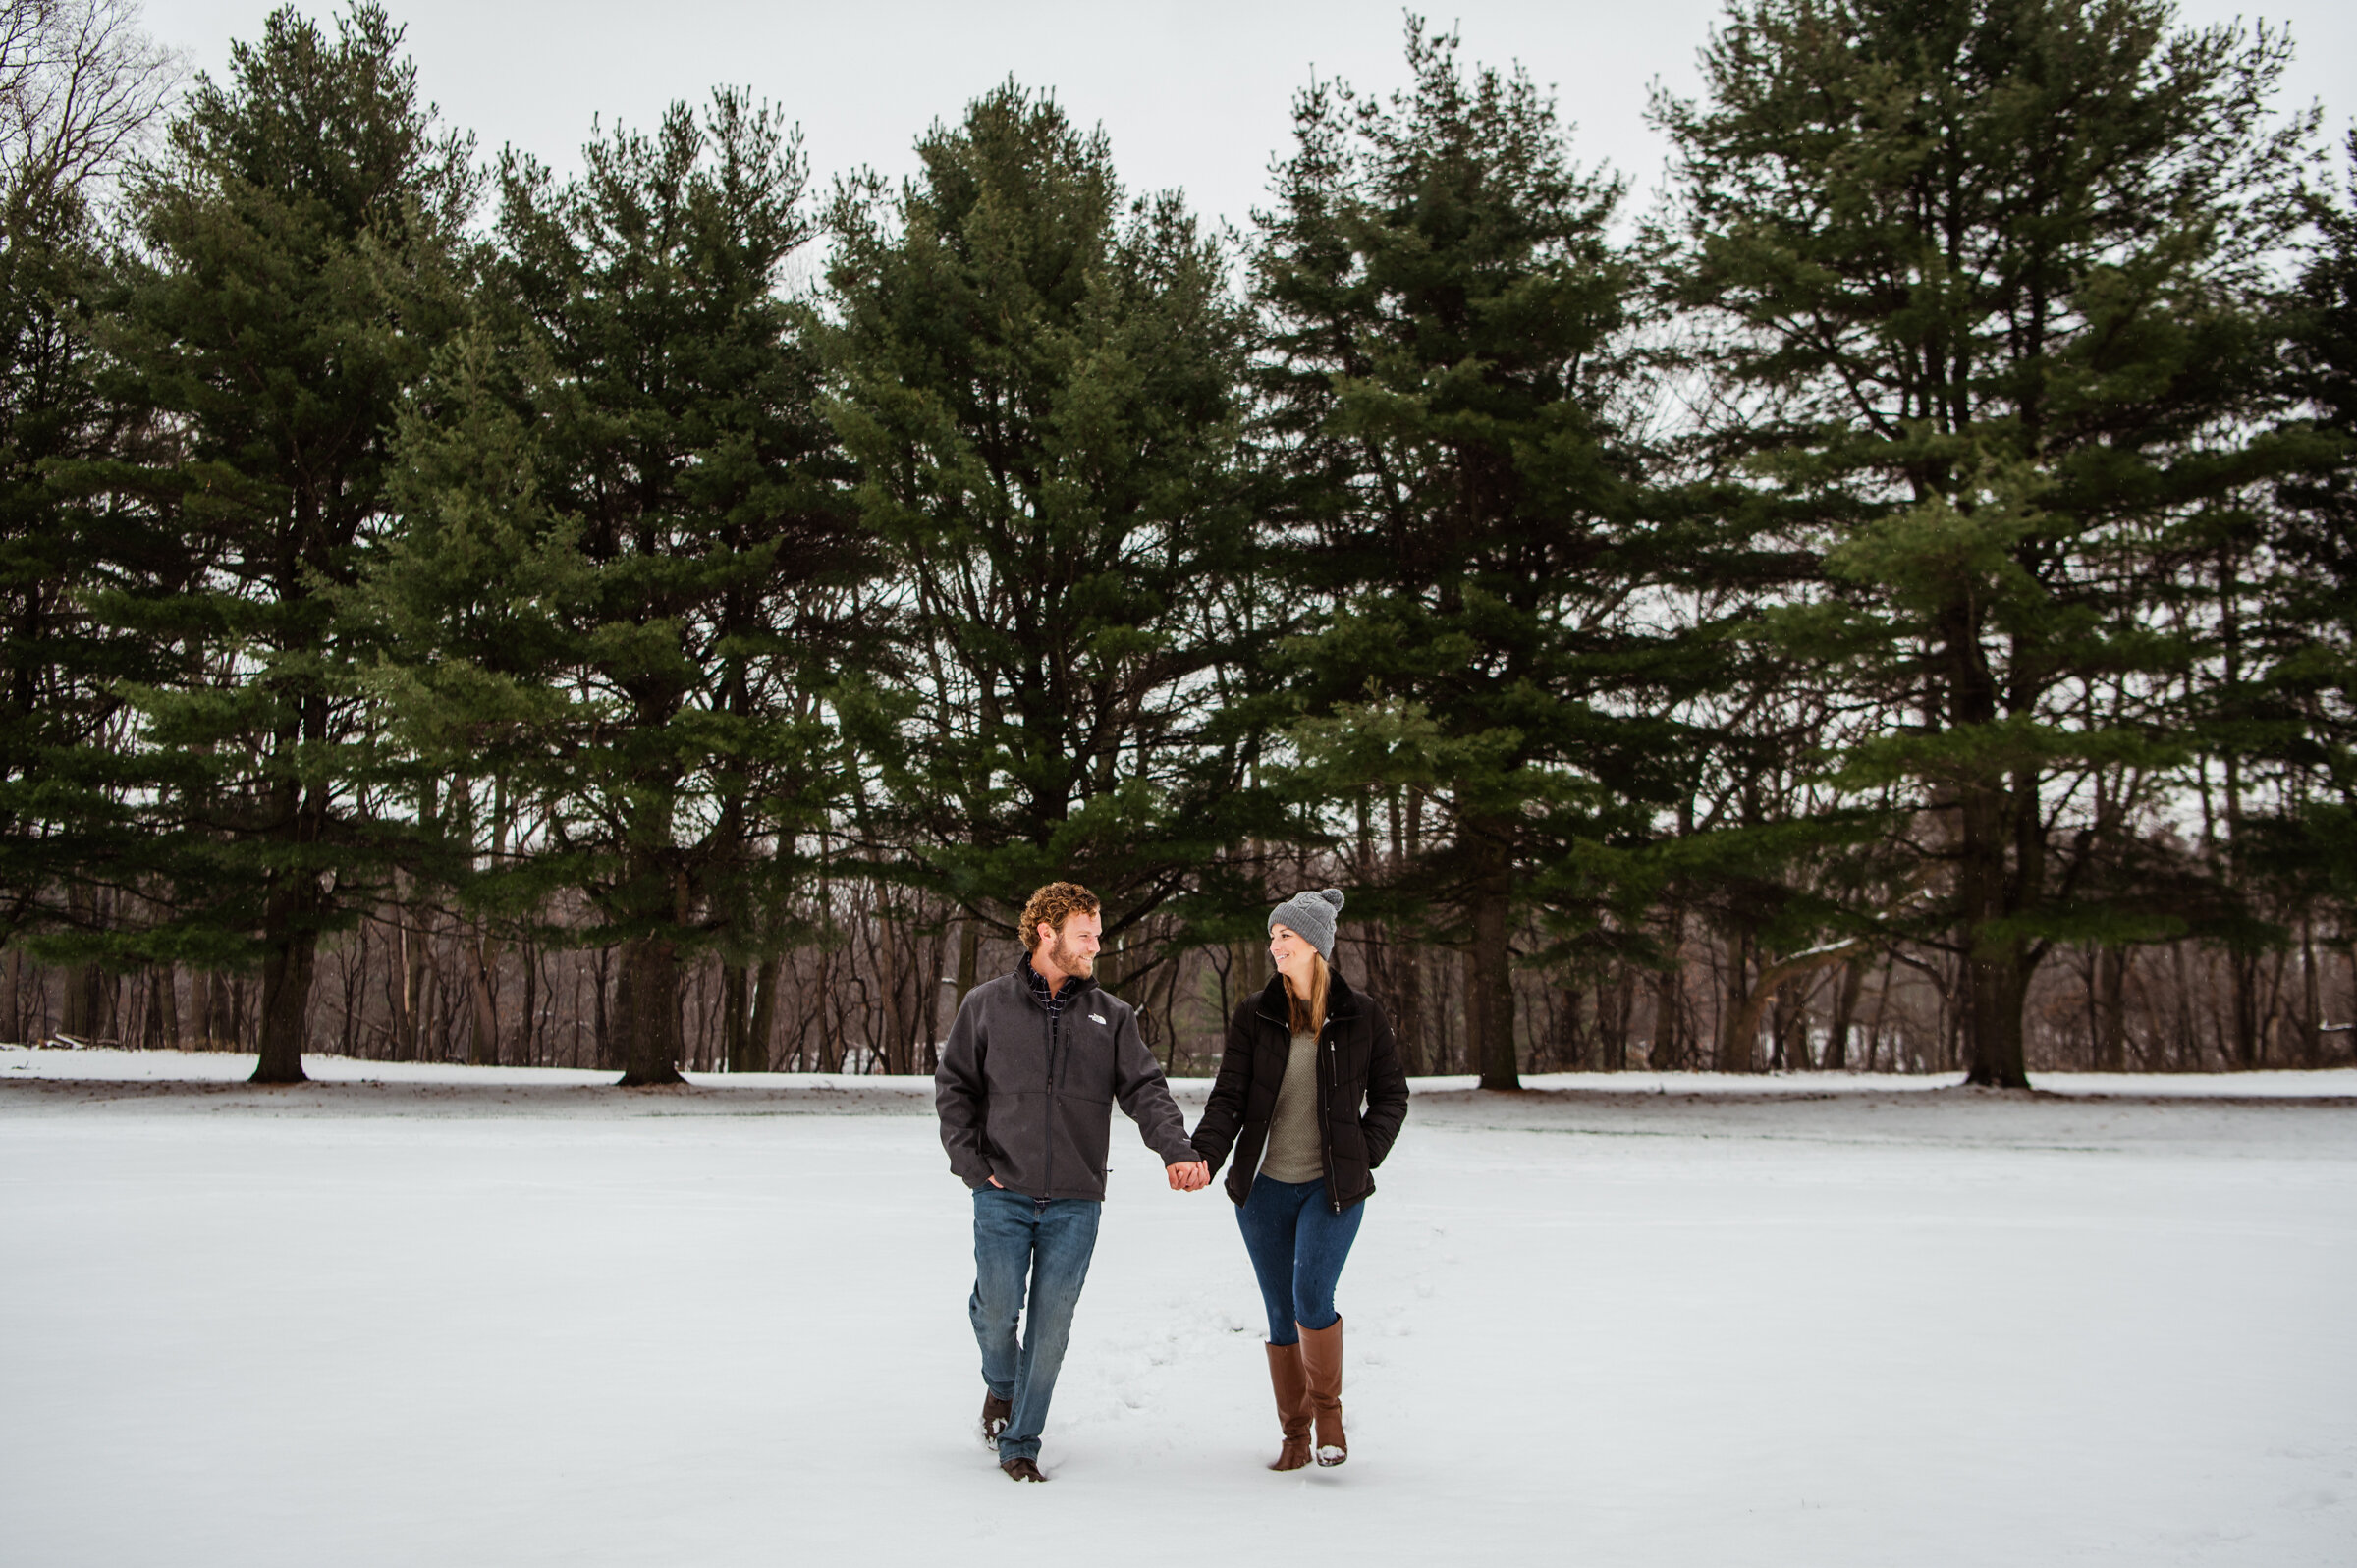 Irondequoit_Beer_Company_Durand_Eastman_Park_Rochester_Engagement_Session_JILL_STUDIO_Rochester_NY_Photographer_7300.jpg